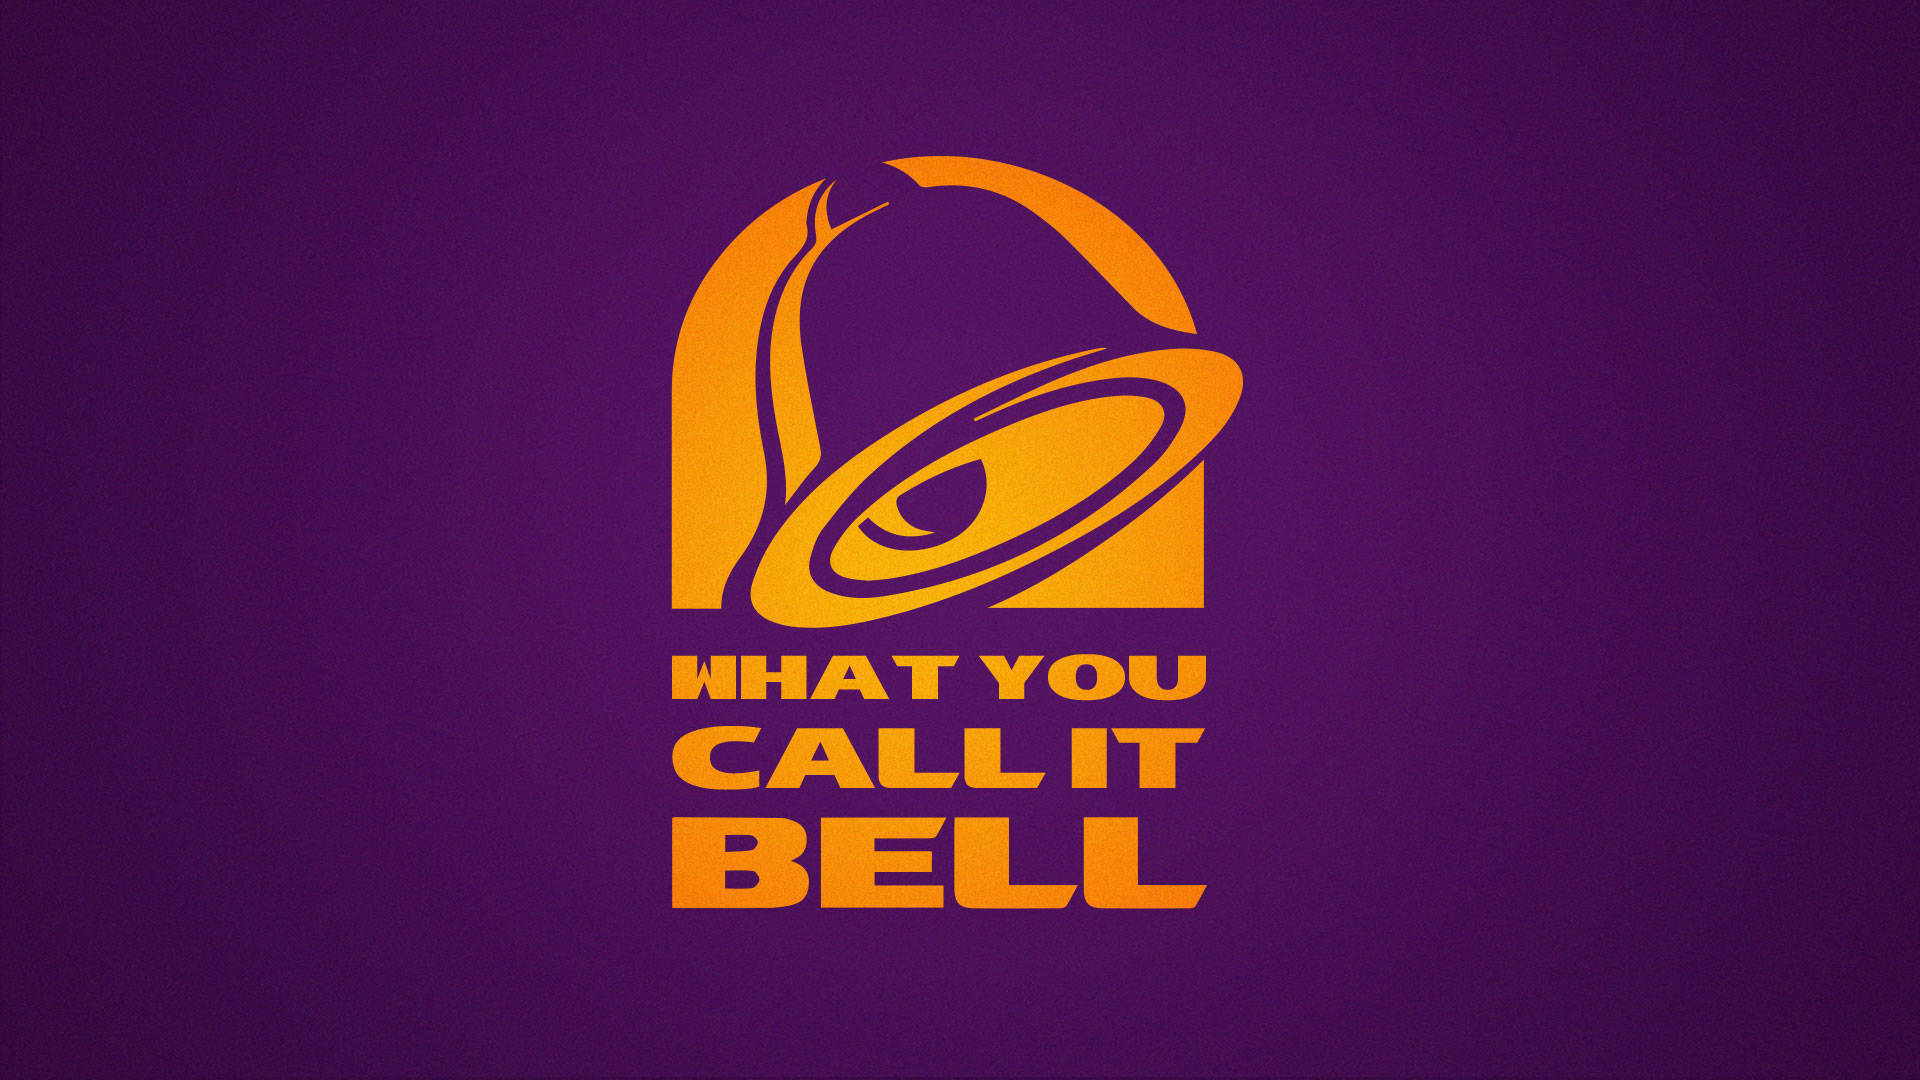 1920X1080 Taco Bell Wallpaper and Background